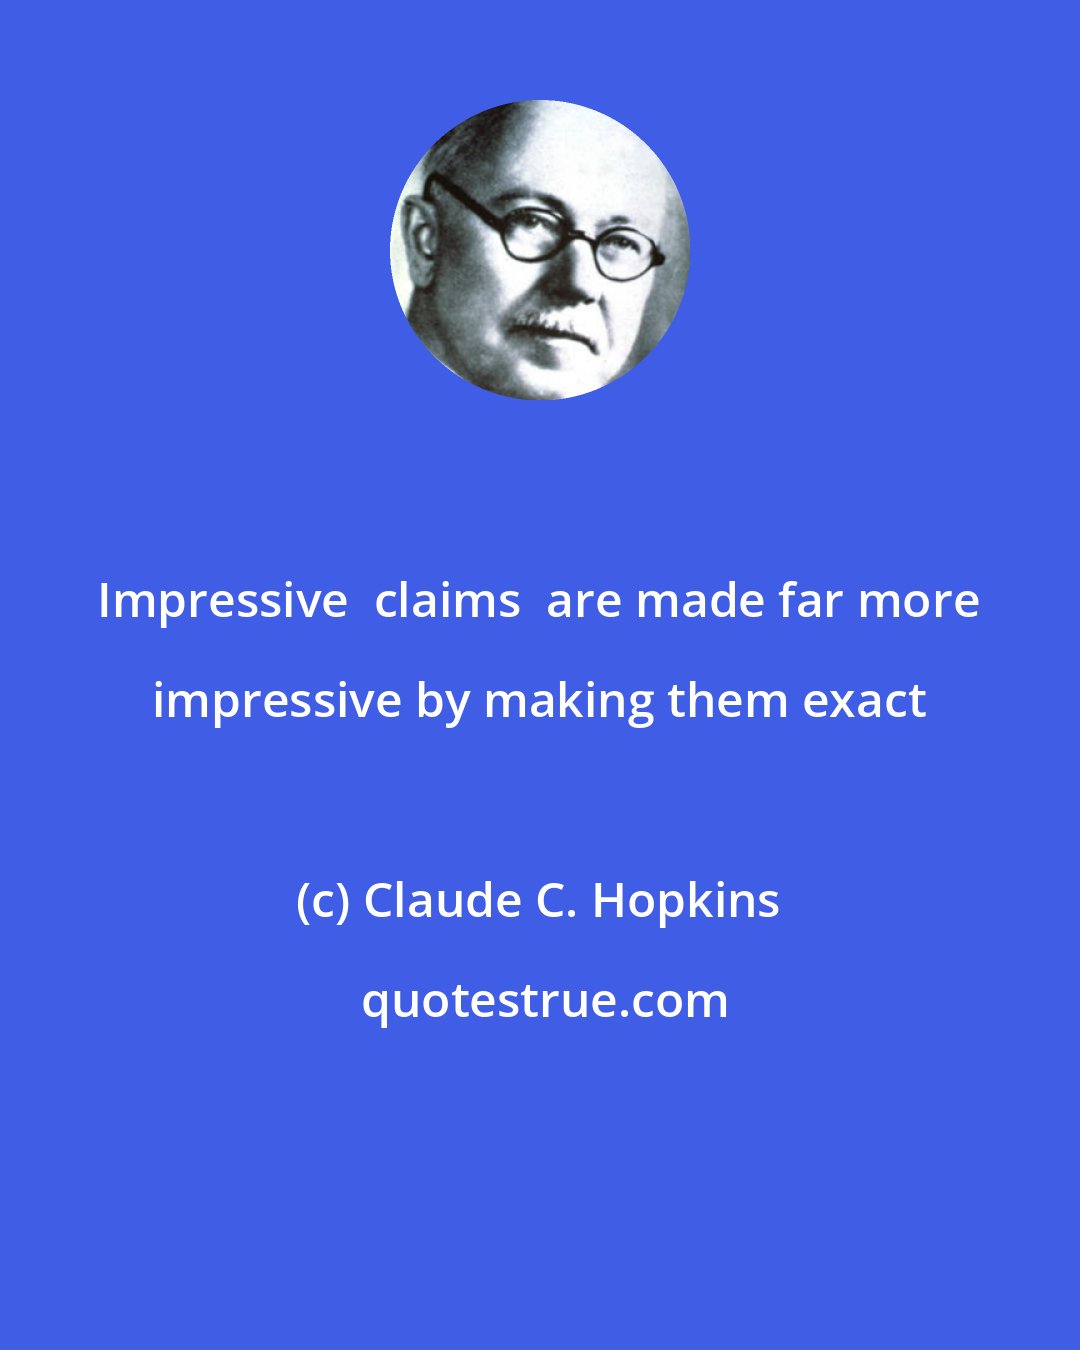 Claude C. Hopkins: Impressive  claims  are made far more impressive by making them exact